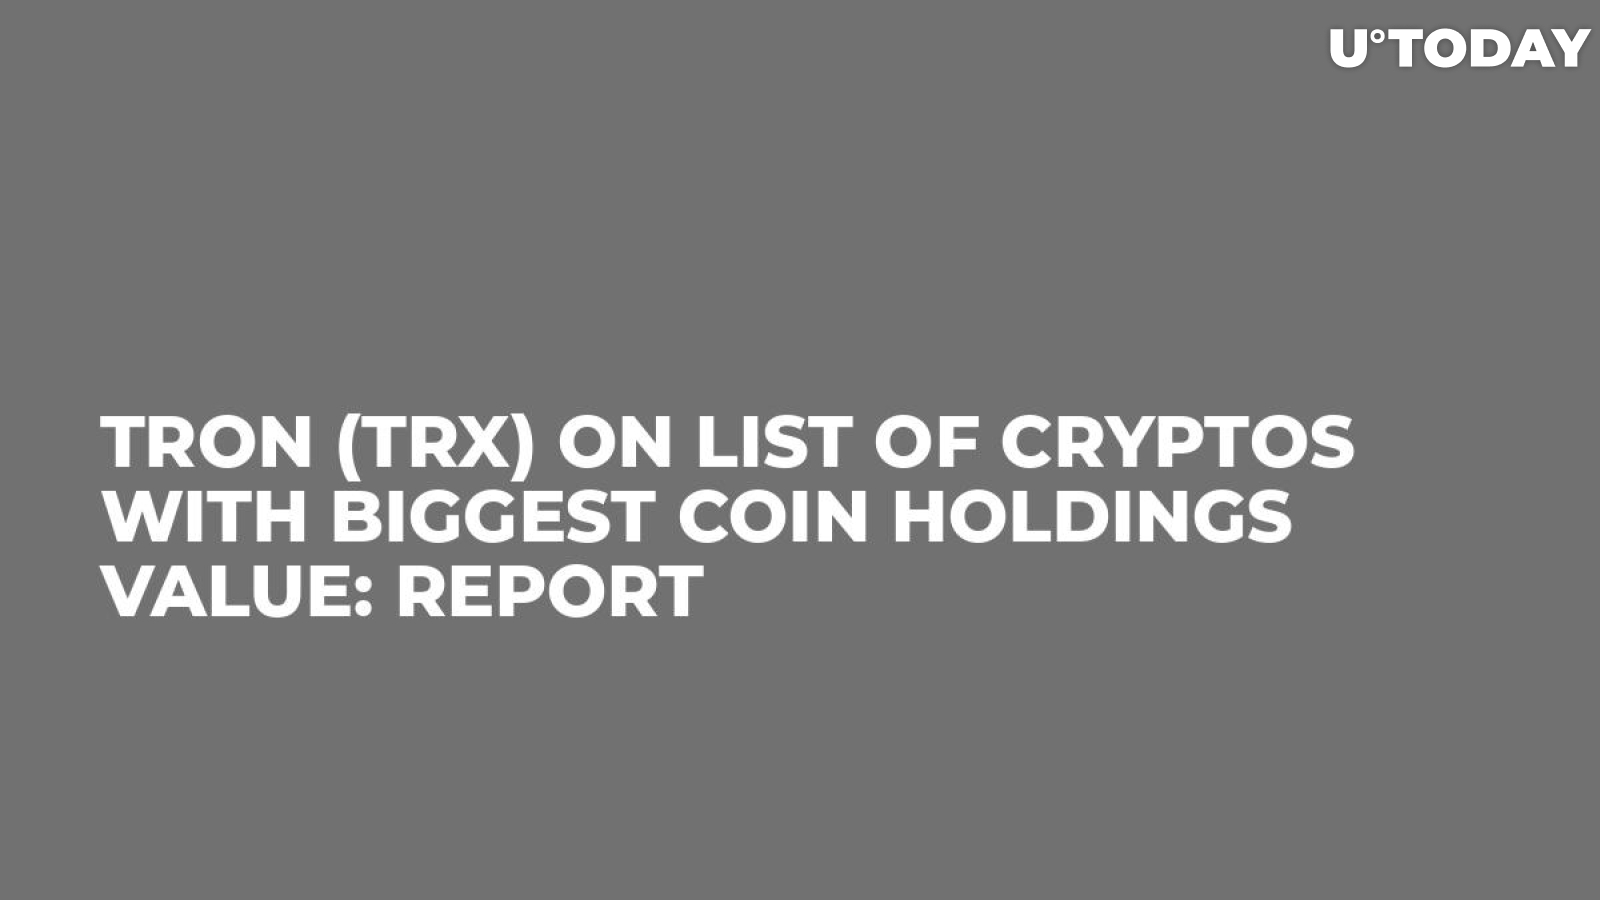 Tron (TRX) On List of Cryptos With Biggest Coin Holdings Value: Report